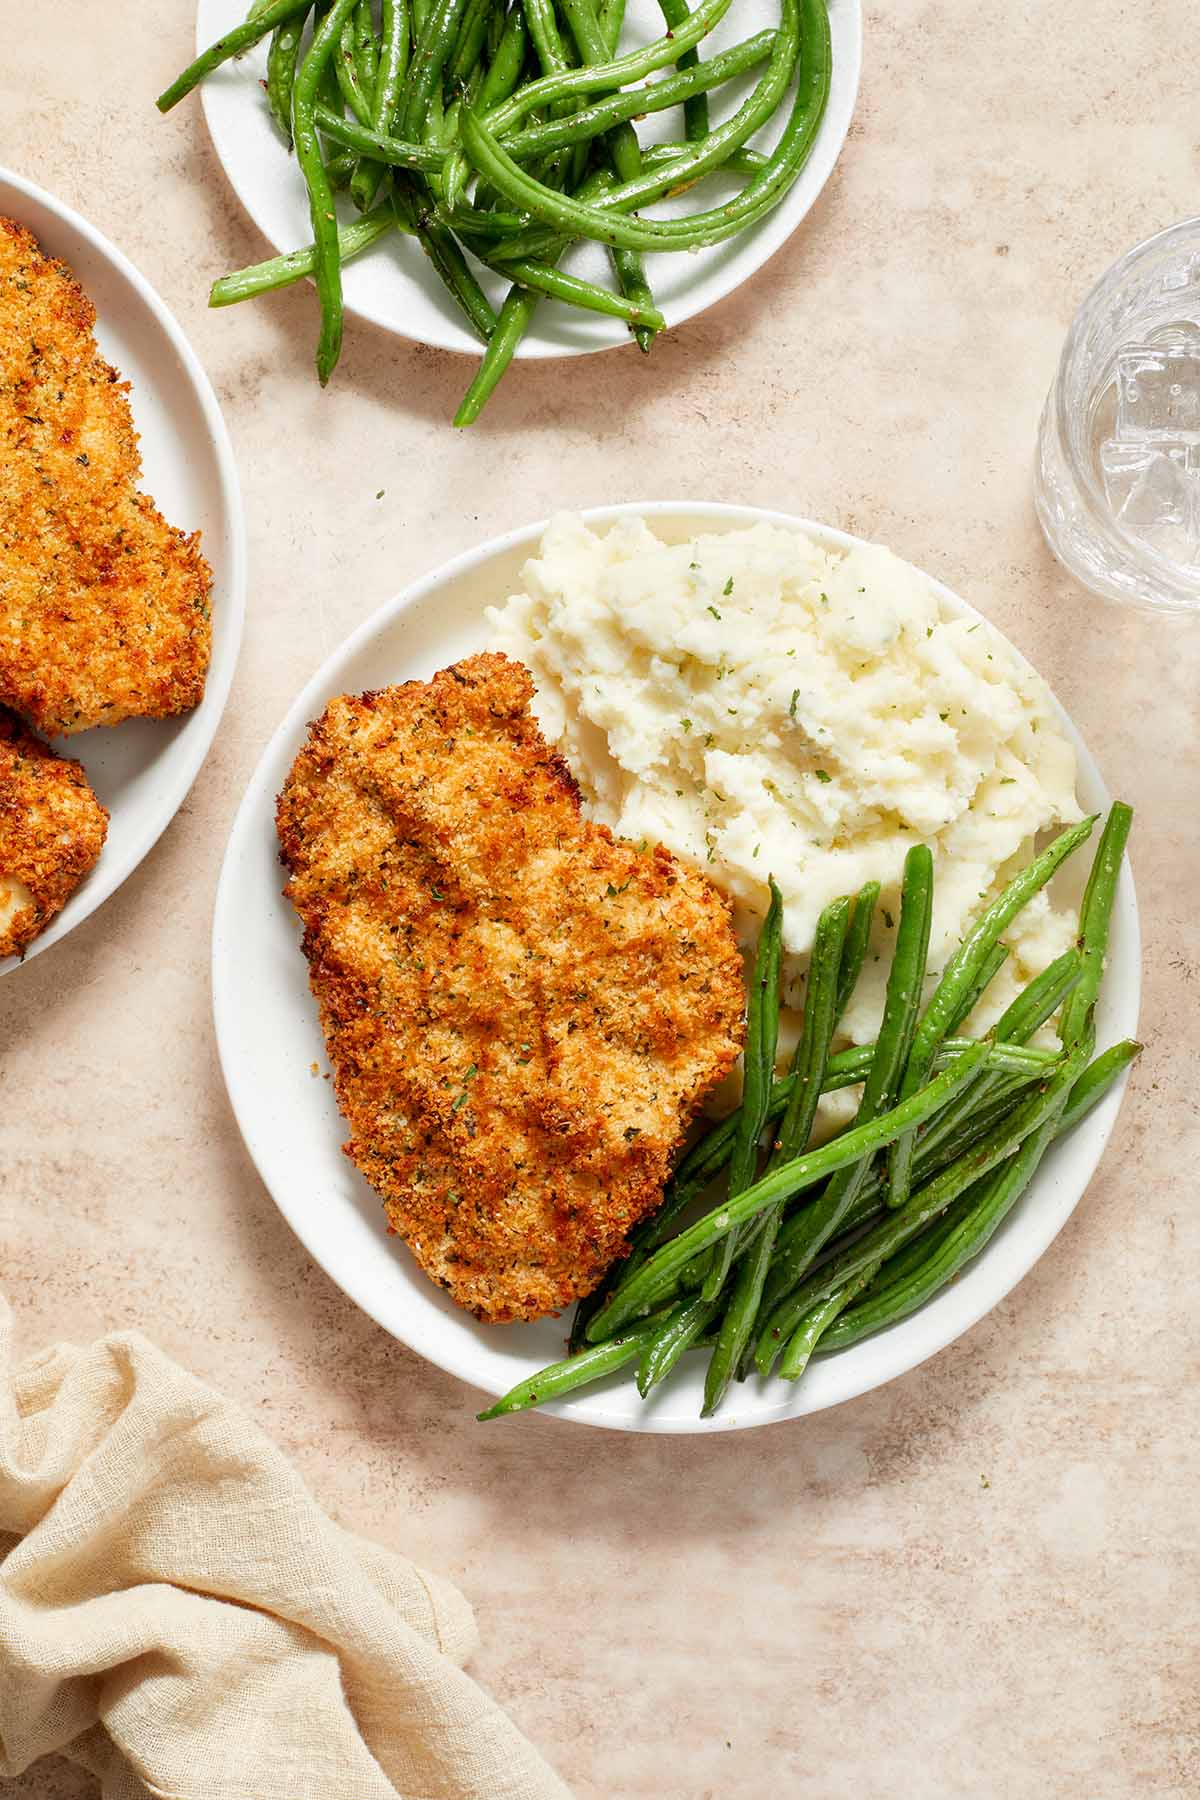 Overhead view of chicken schnitzel on a plate with green beans and mashed potatoes.